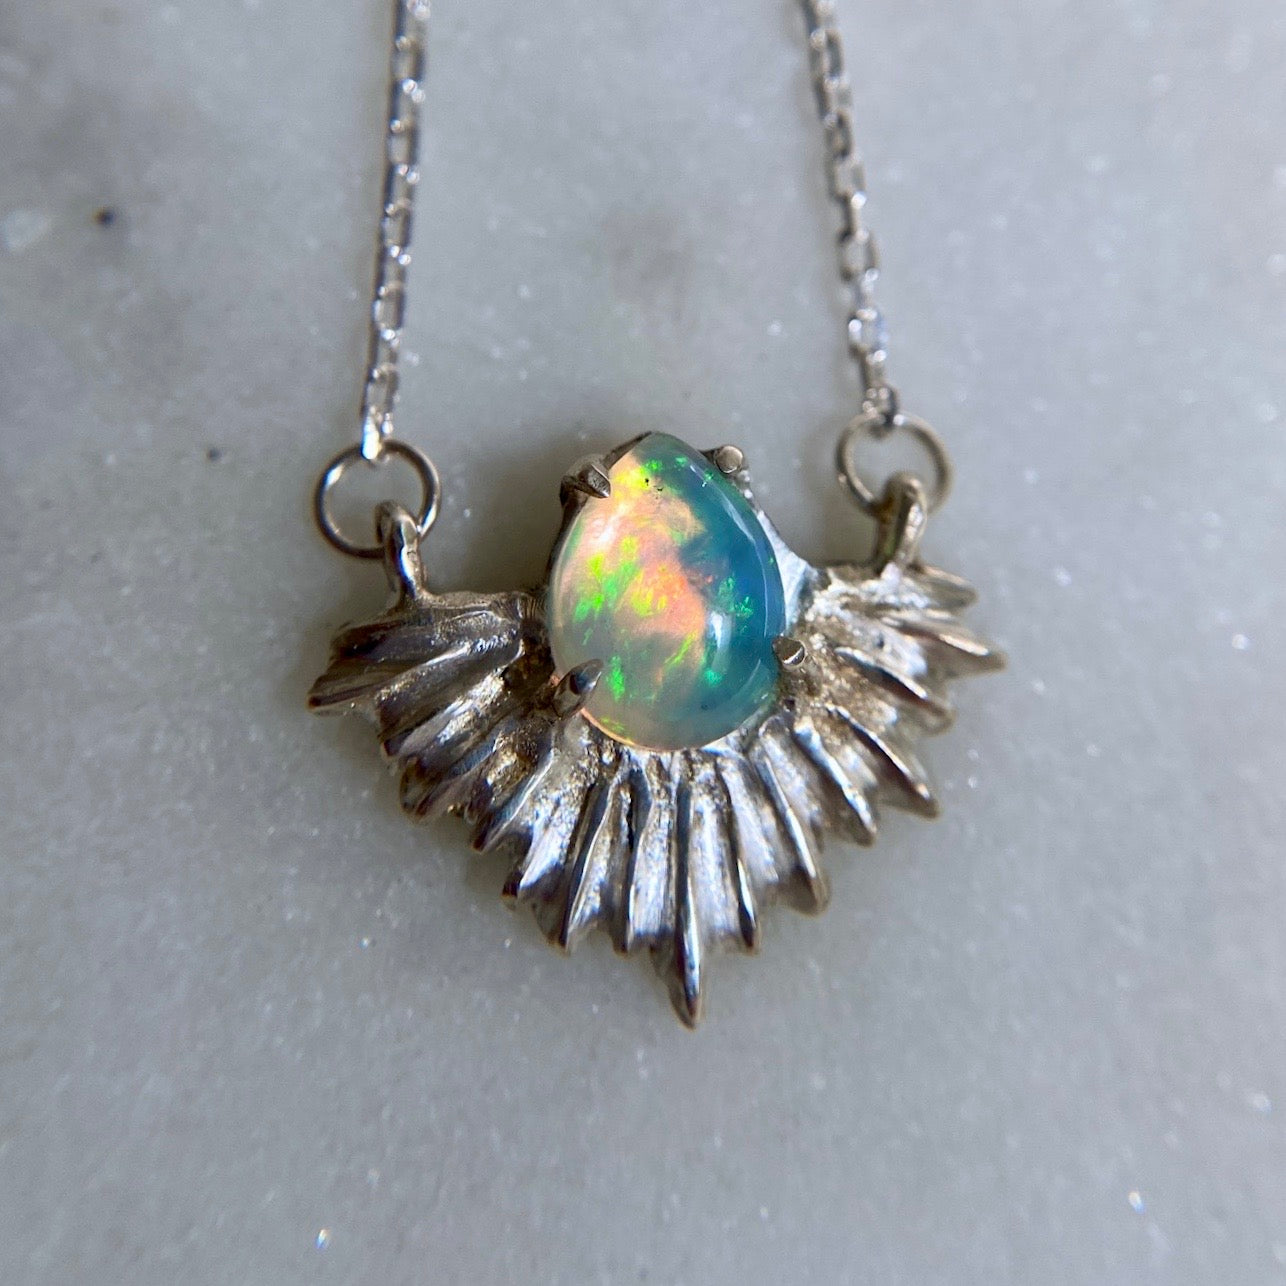 Cosmic opal necklace set in a sterling silver setting, handmade in the USA by Iron Oxide